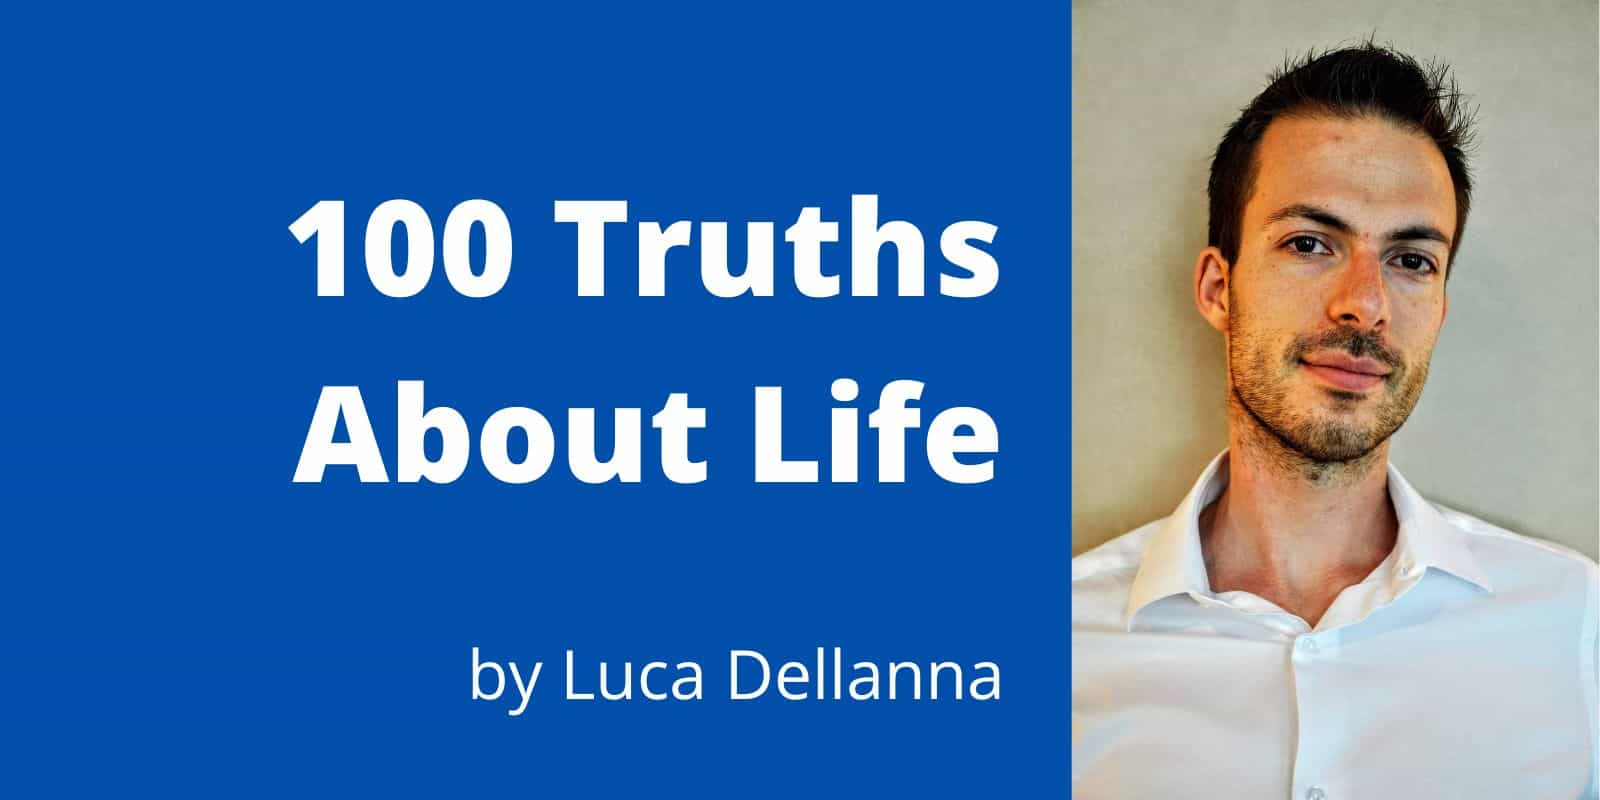 100 Truths About Life